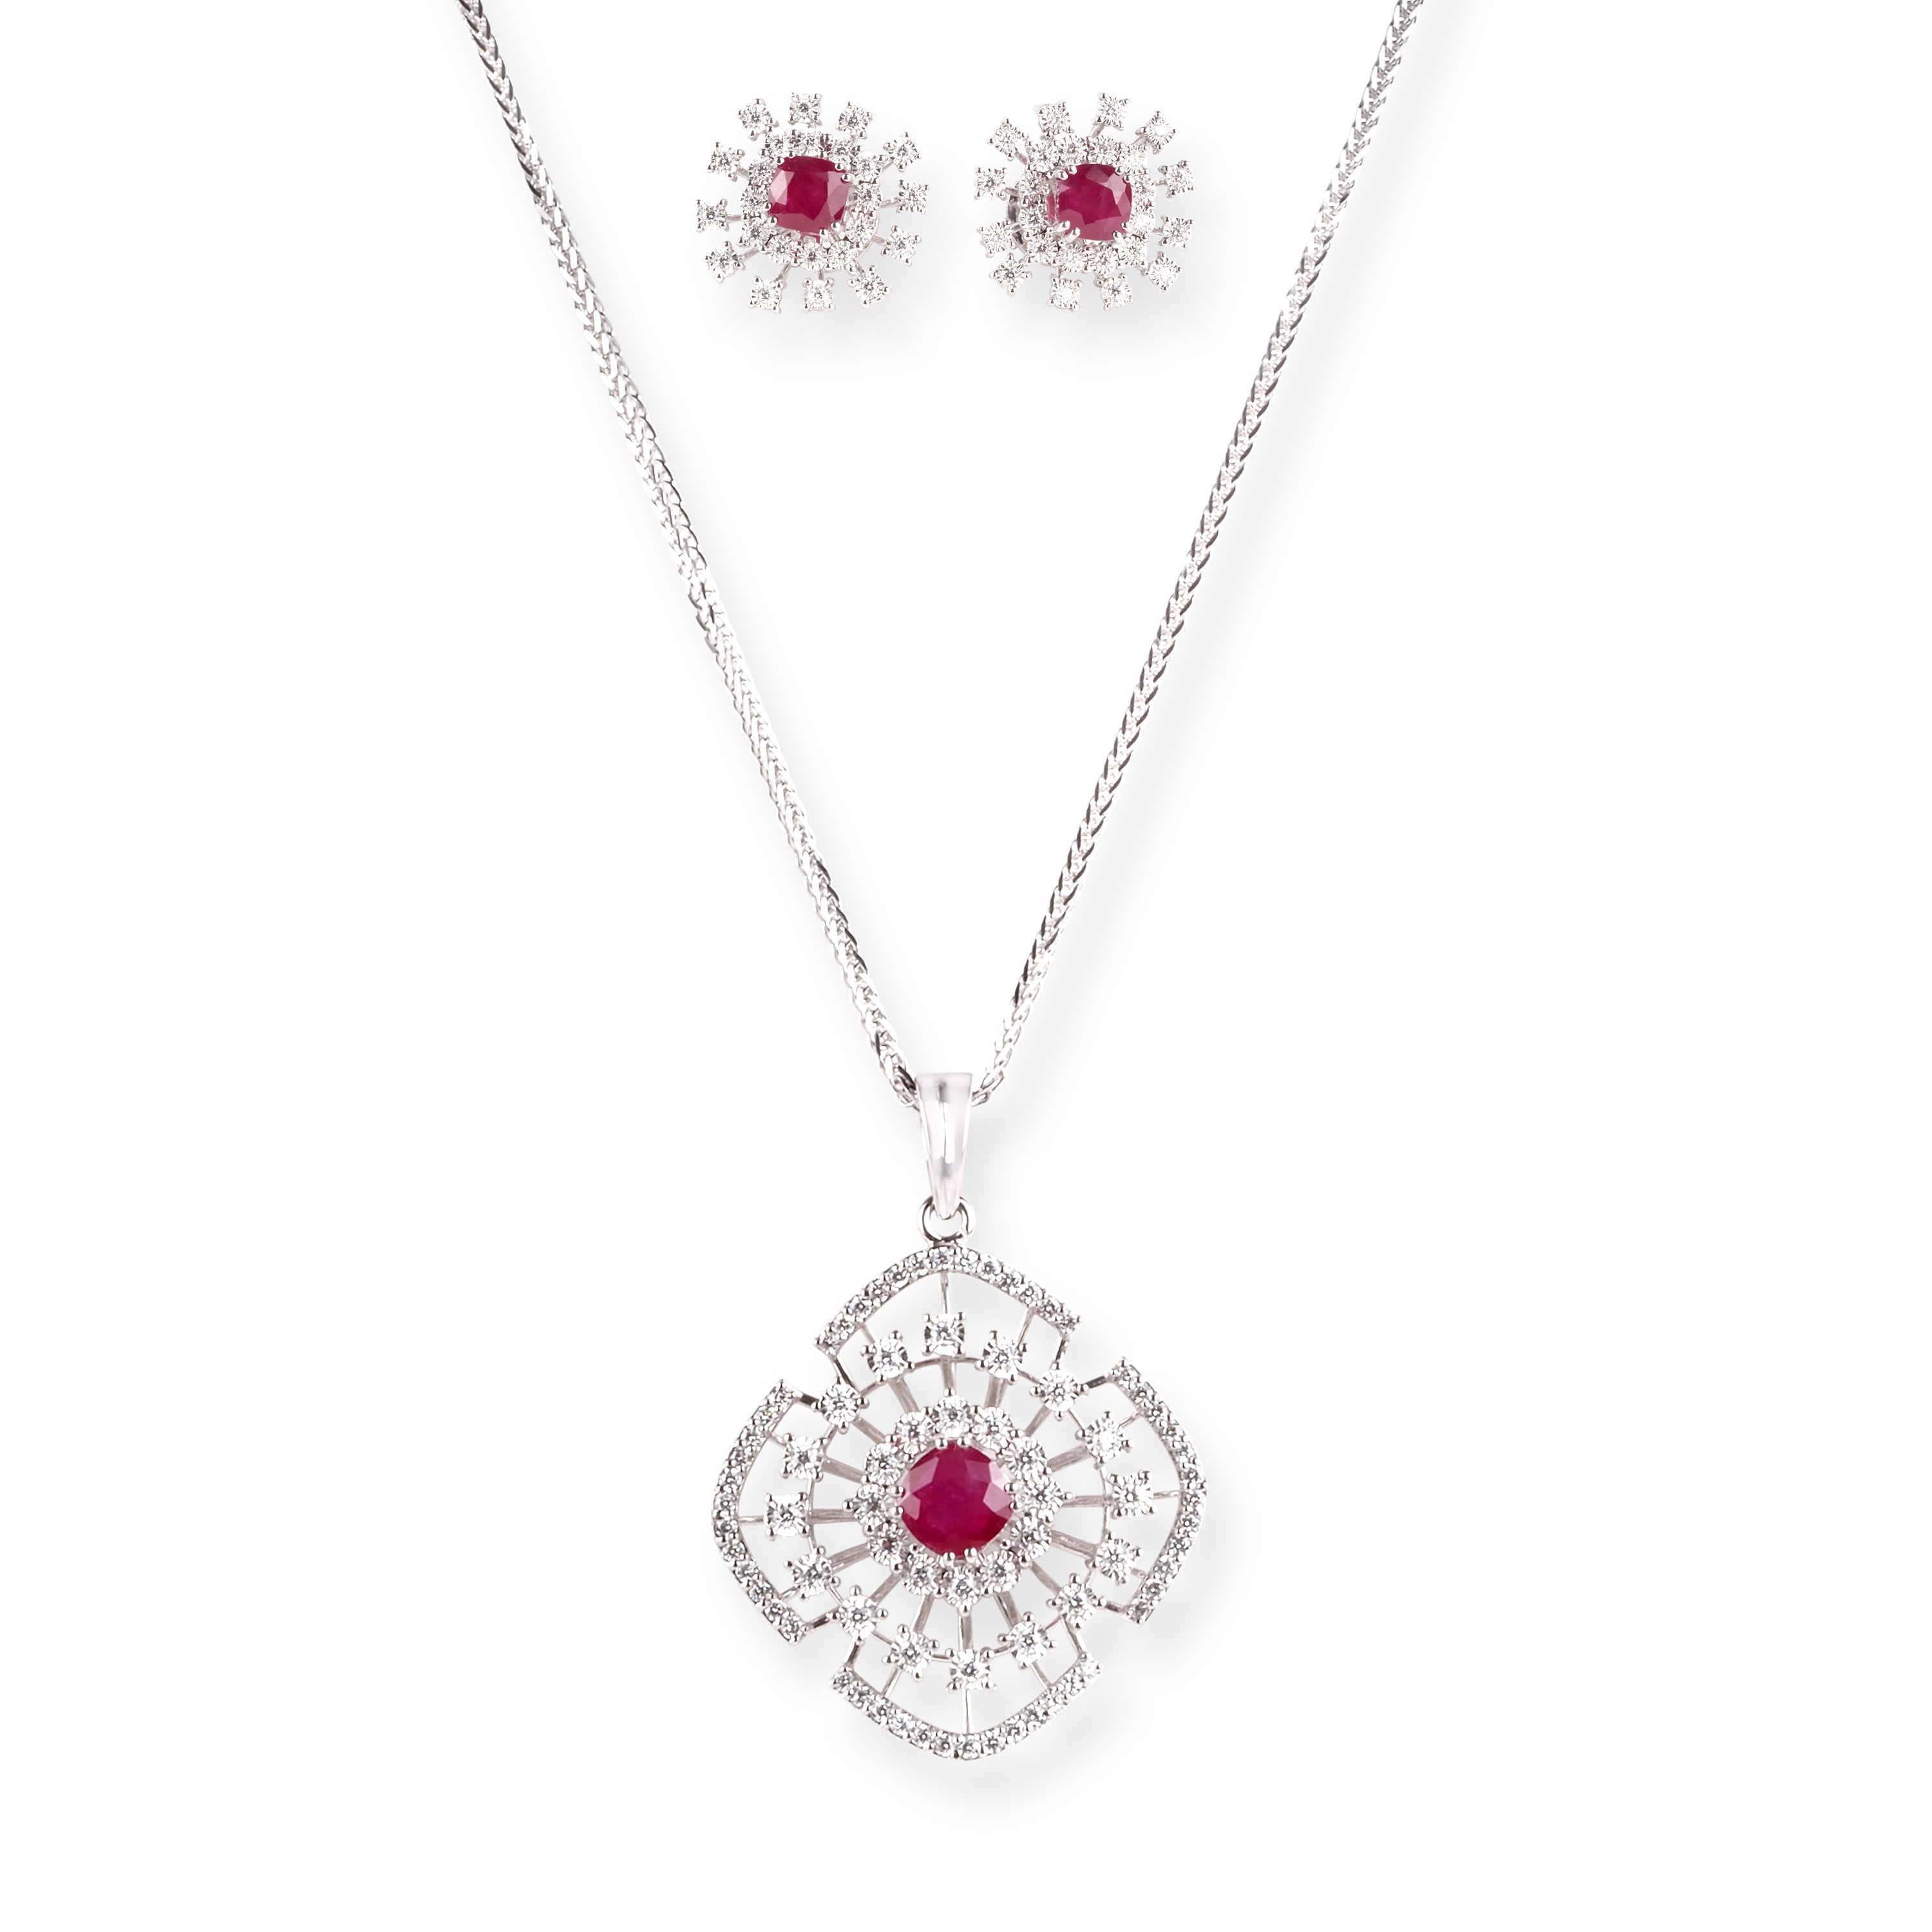 18ct White Gold Diamond and Ruby Pendant Suite C-7048a MCS7683 MCS7684